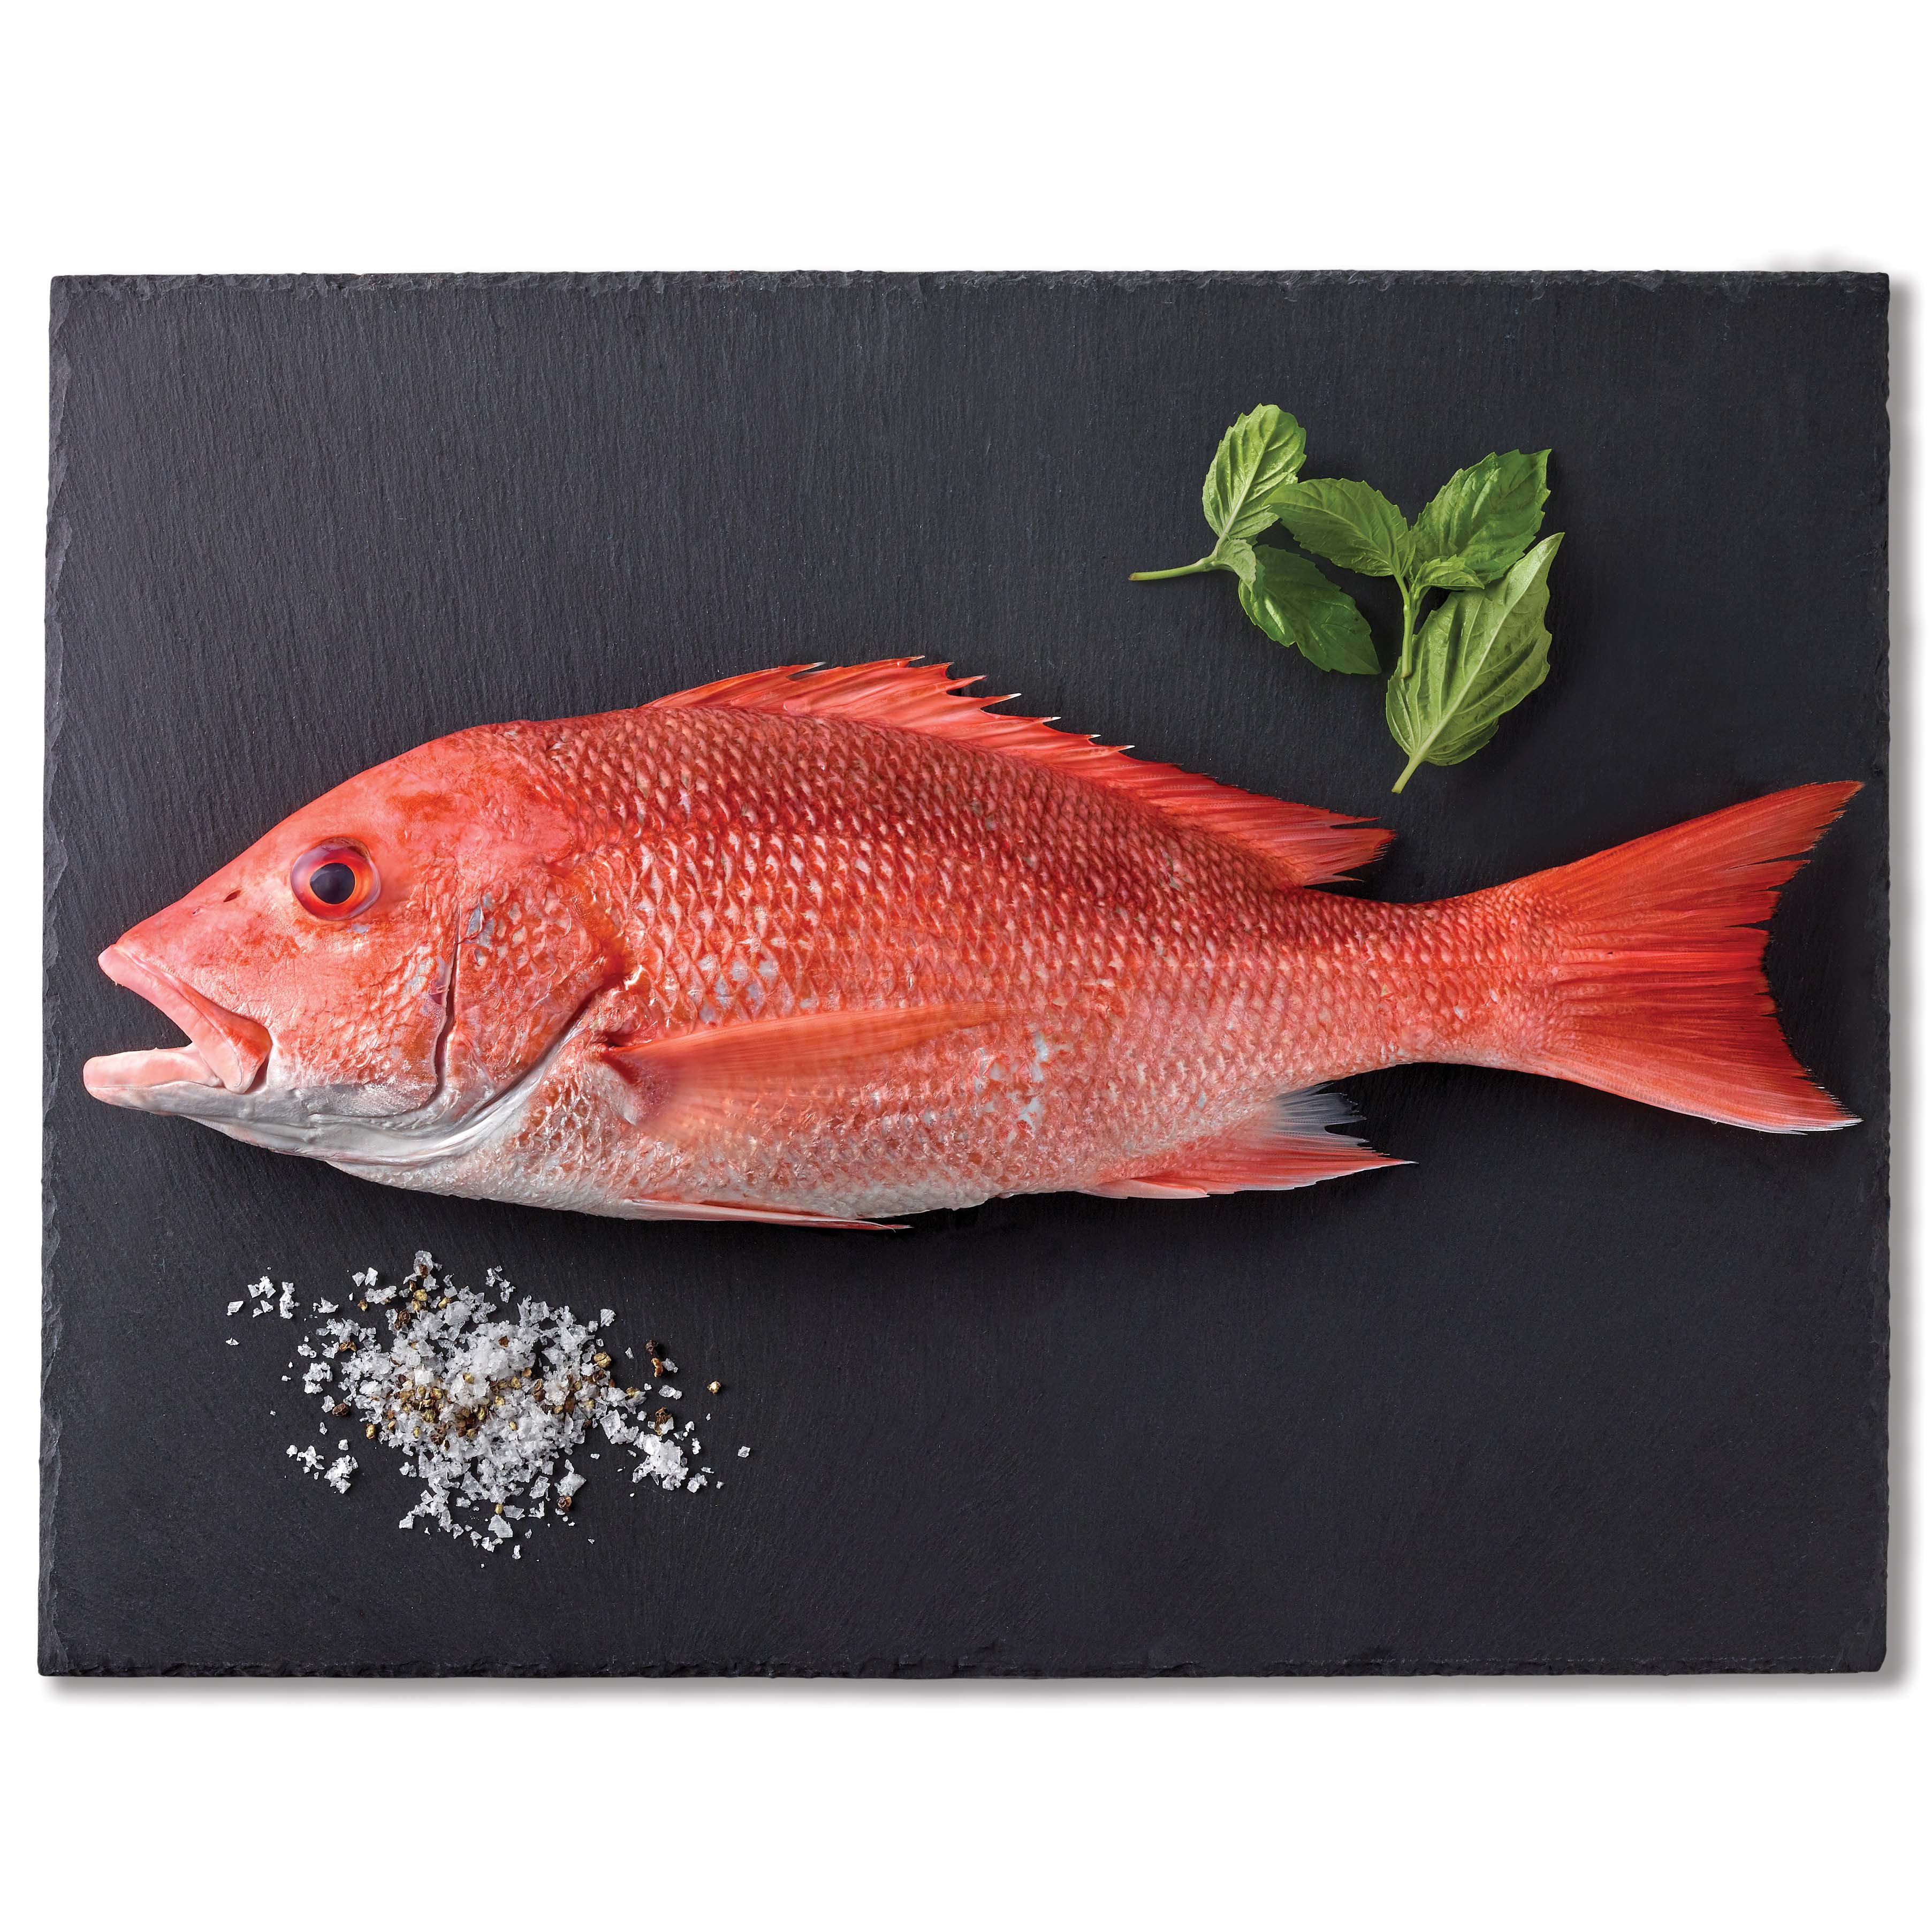 How About Some Very Affordable Domestic Genuine American Red Snapper? -  Congressional Seafood